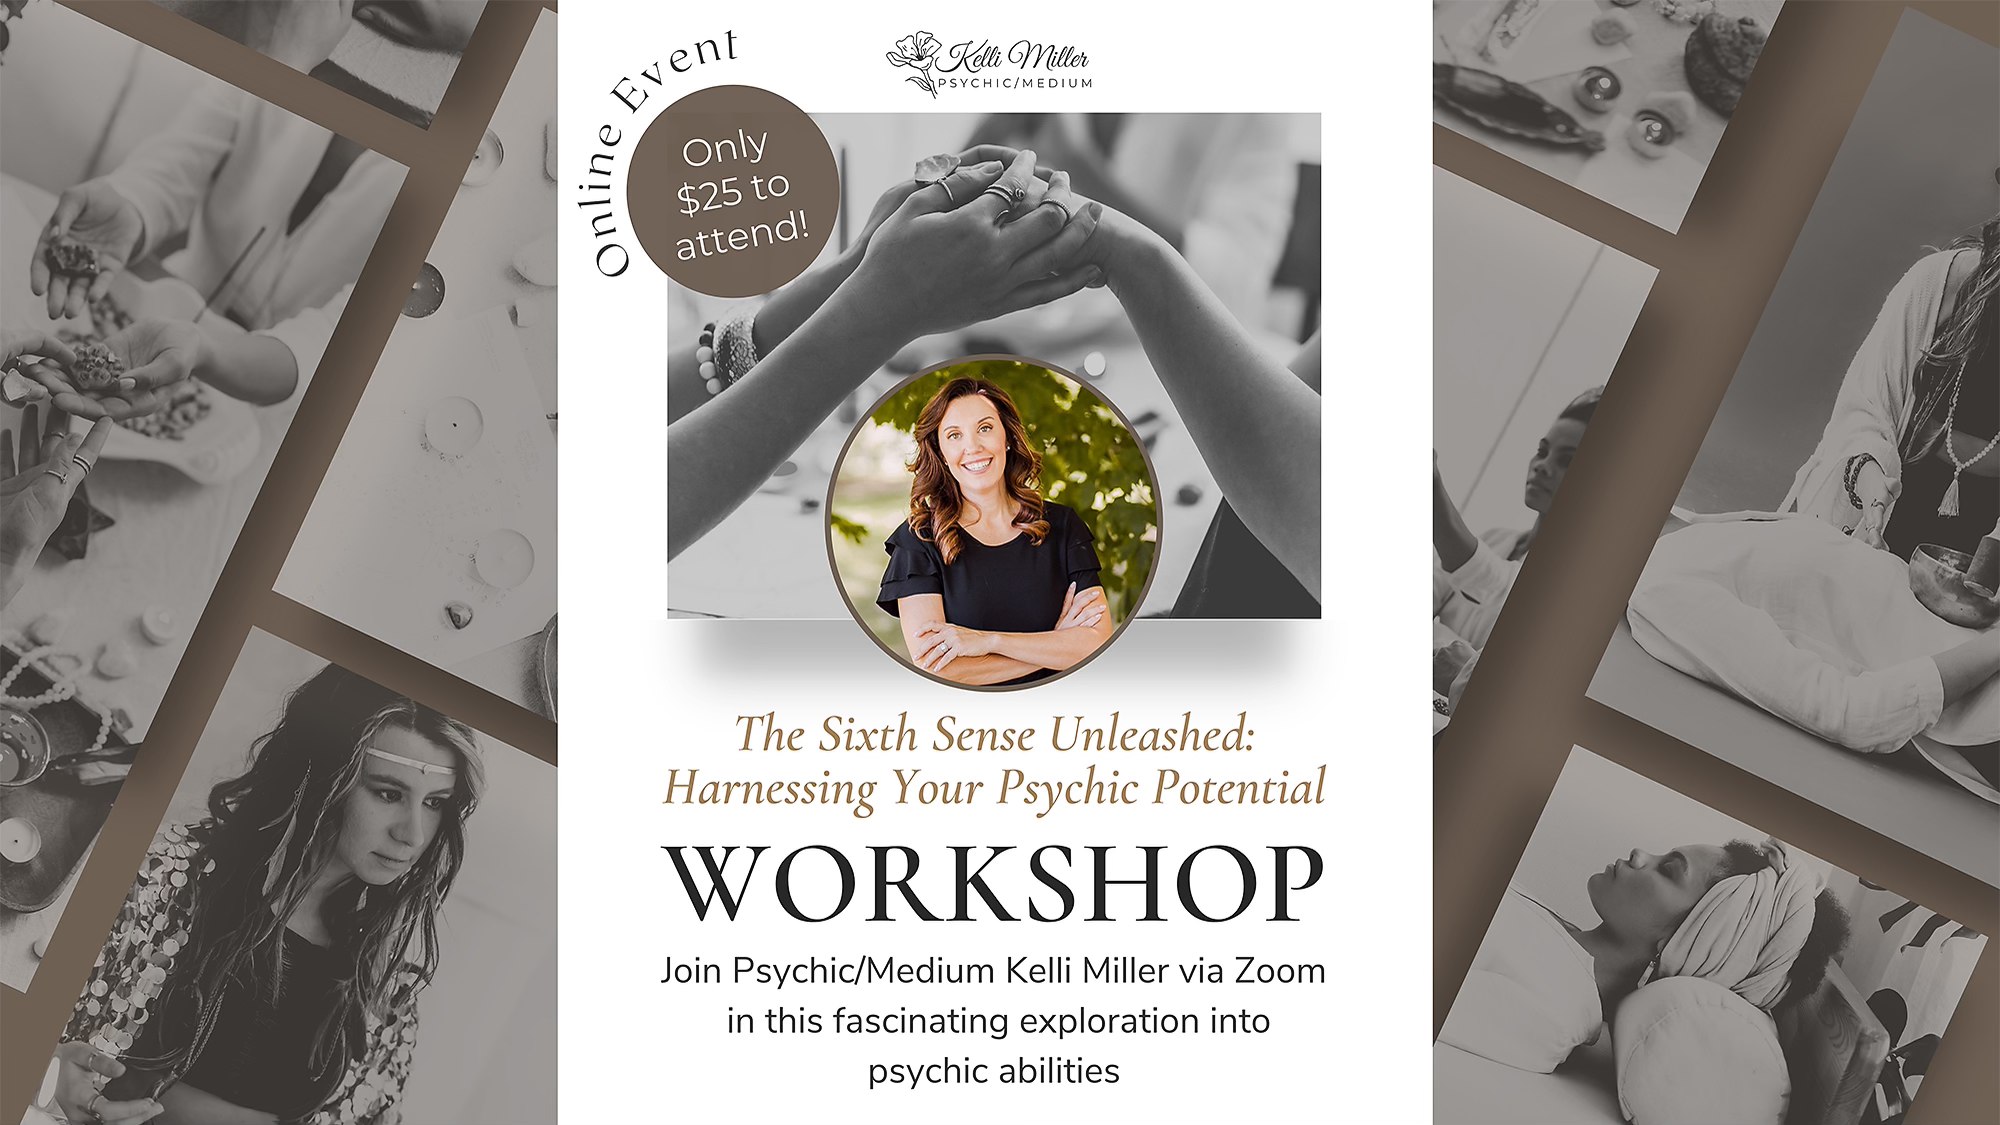 The Sixth Sense Unleashed: Harnessing Your Psychic Potential Workshop